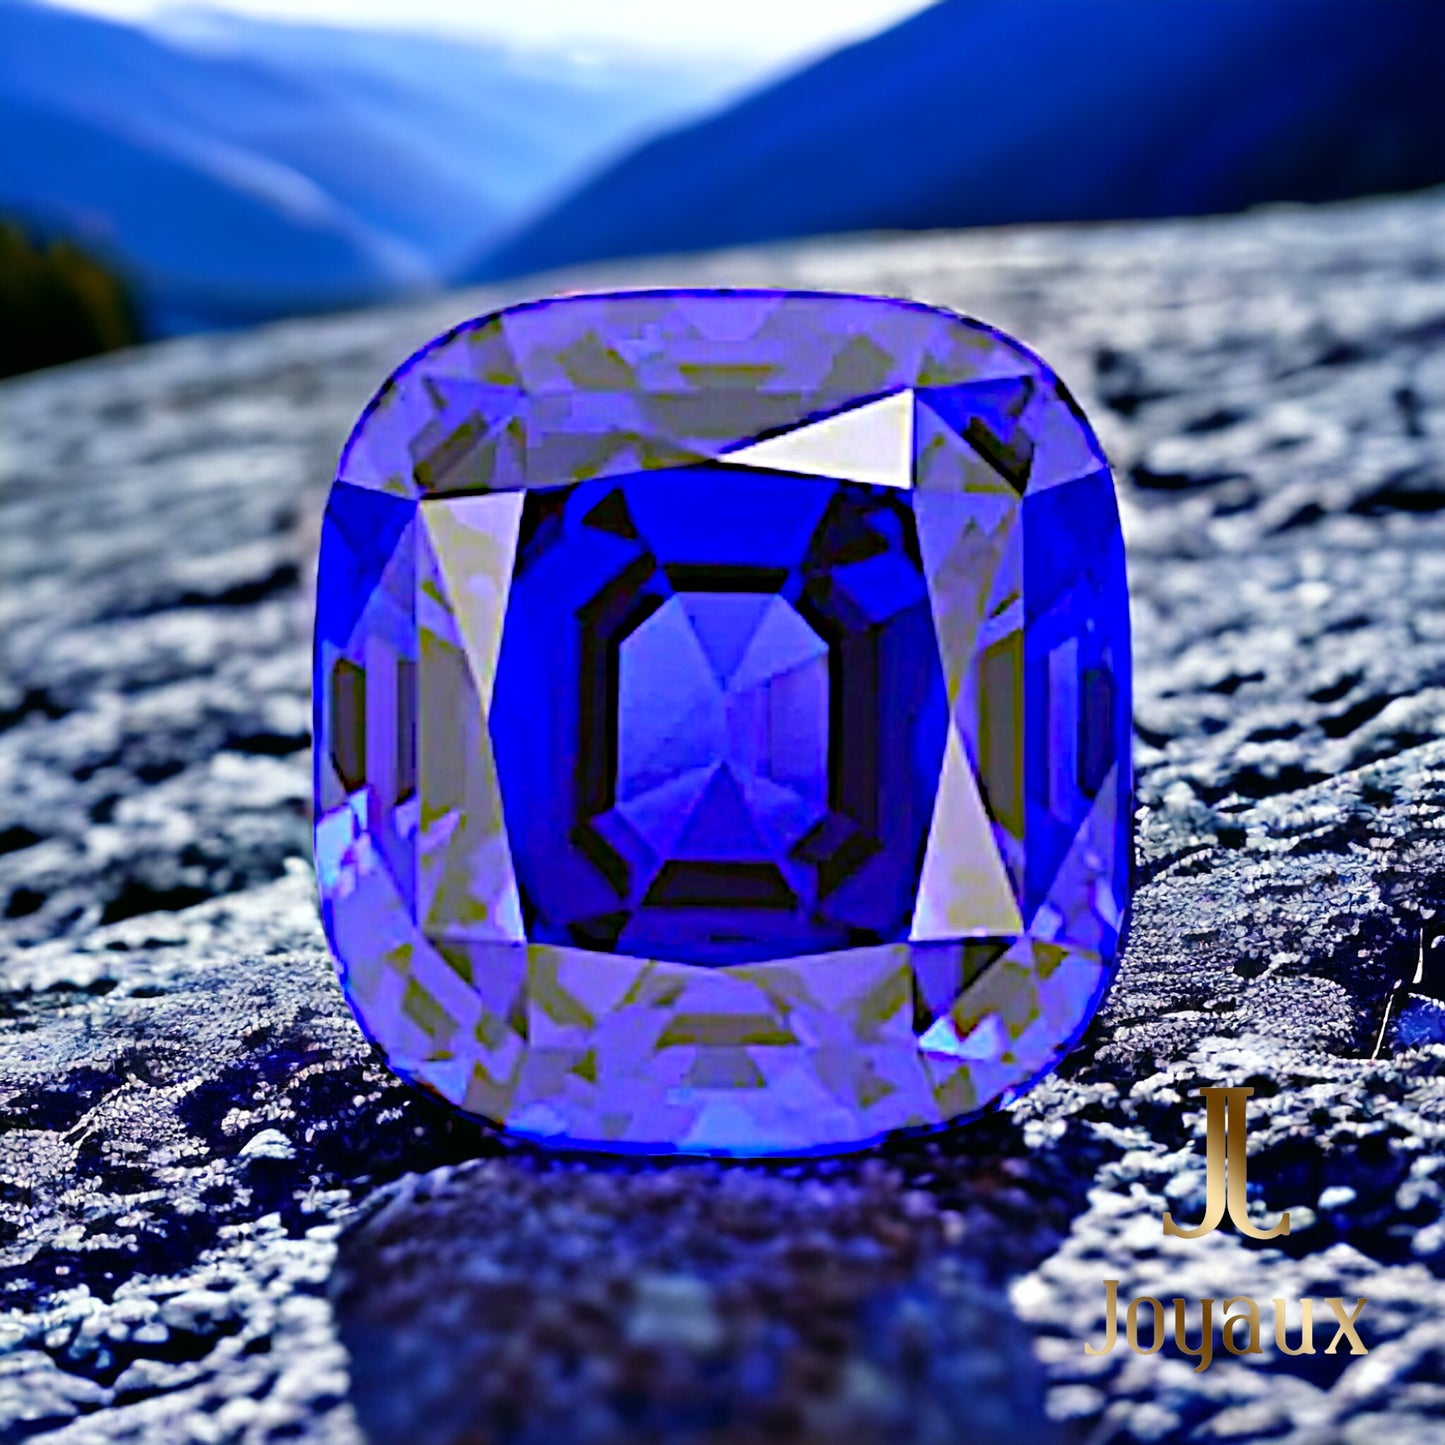  This Tanzanite, mined from the depths of the Merelani Hills in Tanzania, is a treasure born from the very heart of the continent. Discovered in 1967 by the intrepid explorer Manuel De Souza, these gems are as rare as the most thrilling adventures. 